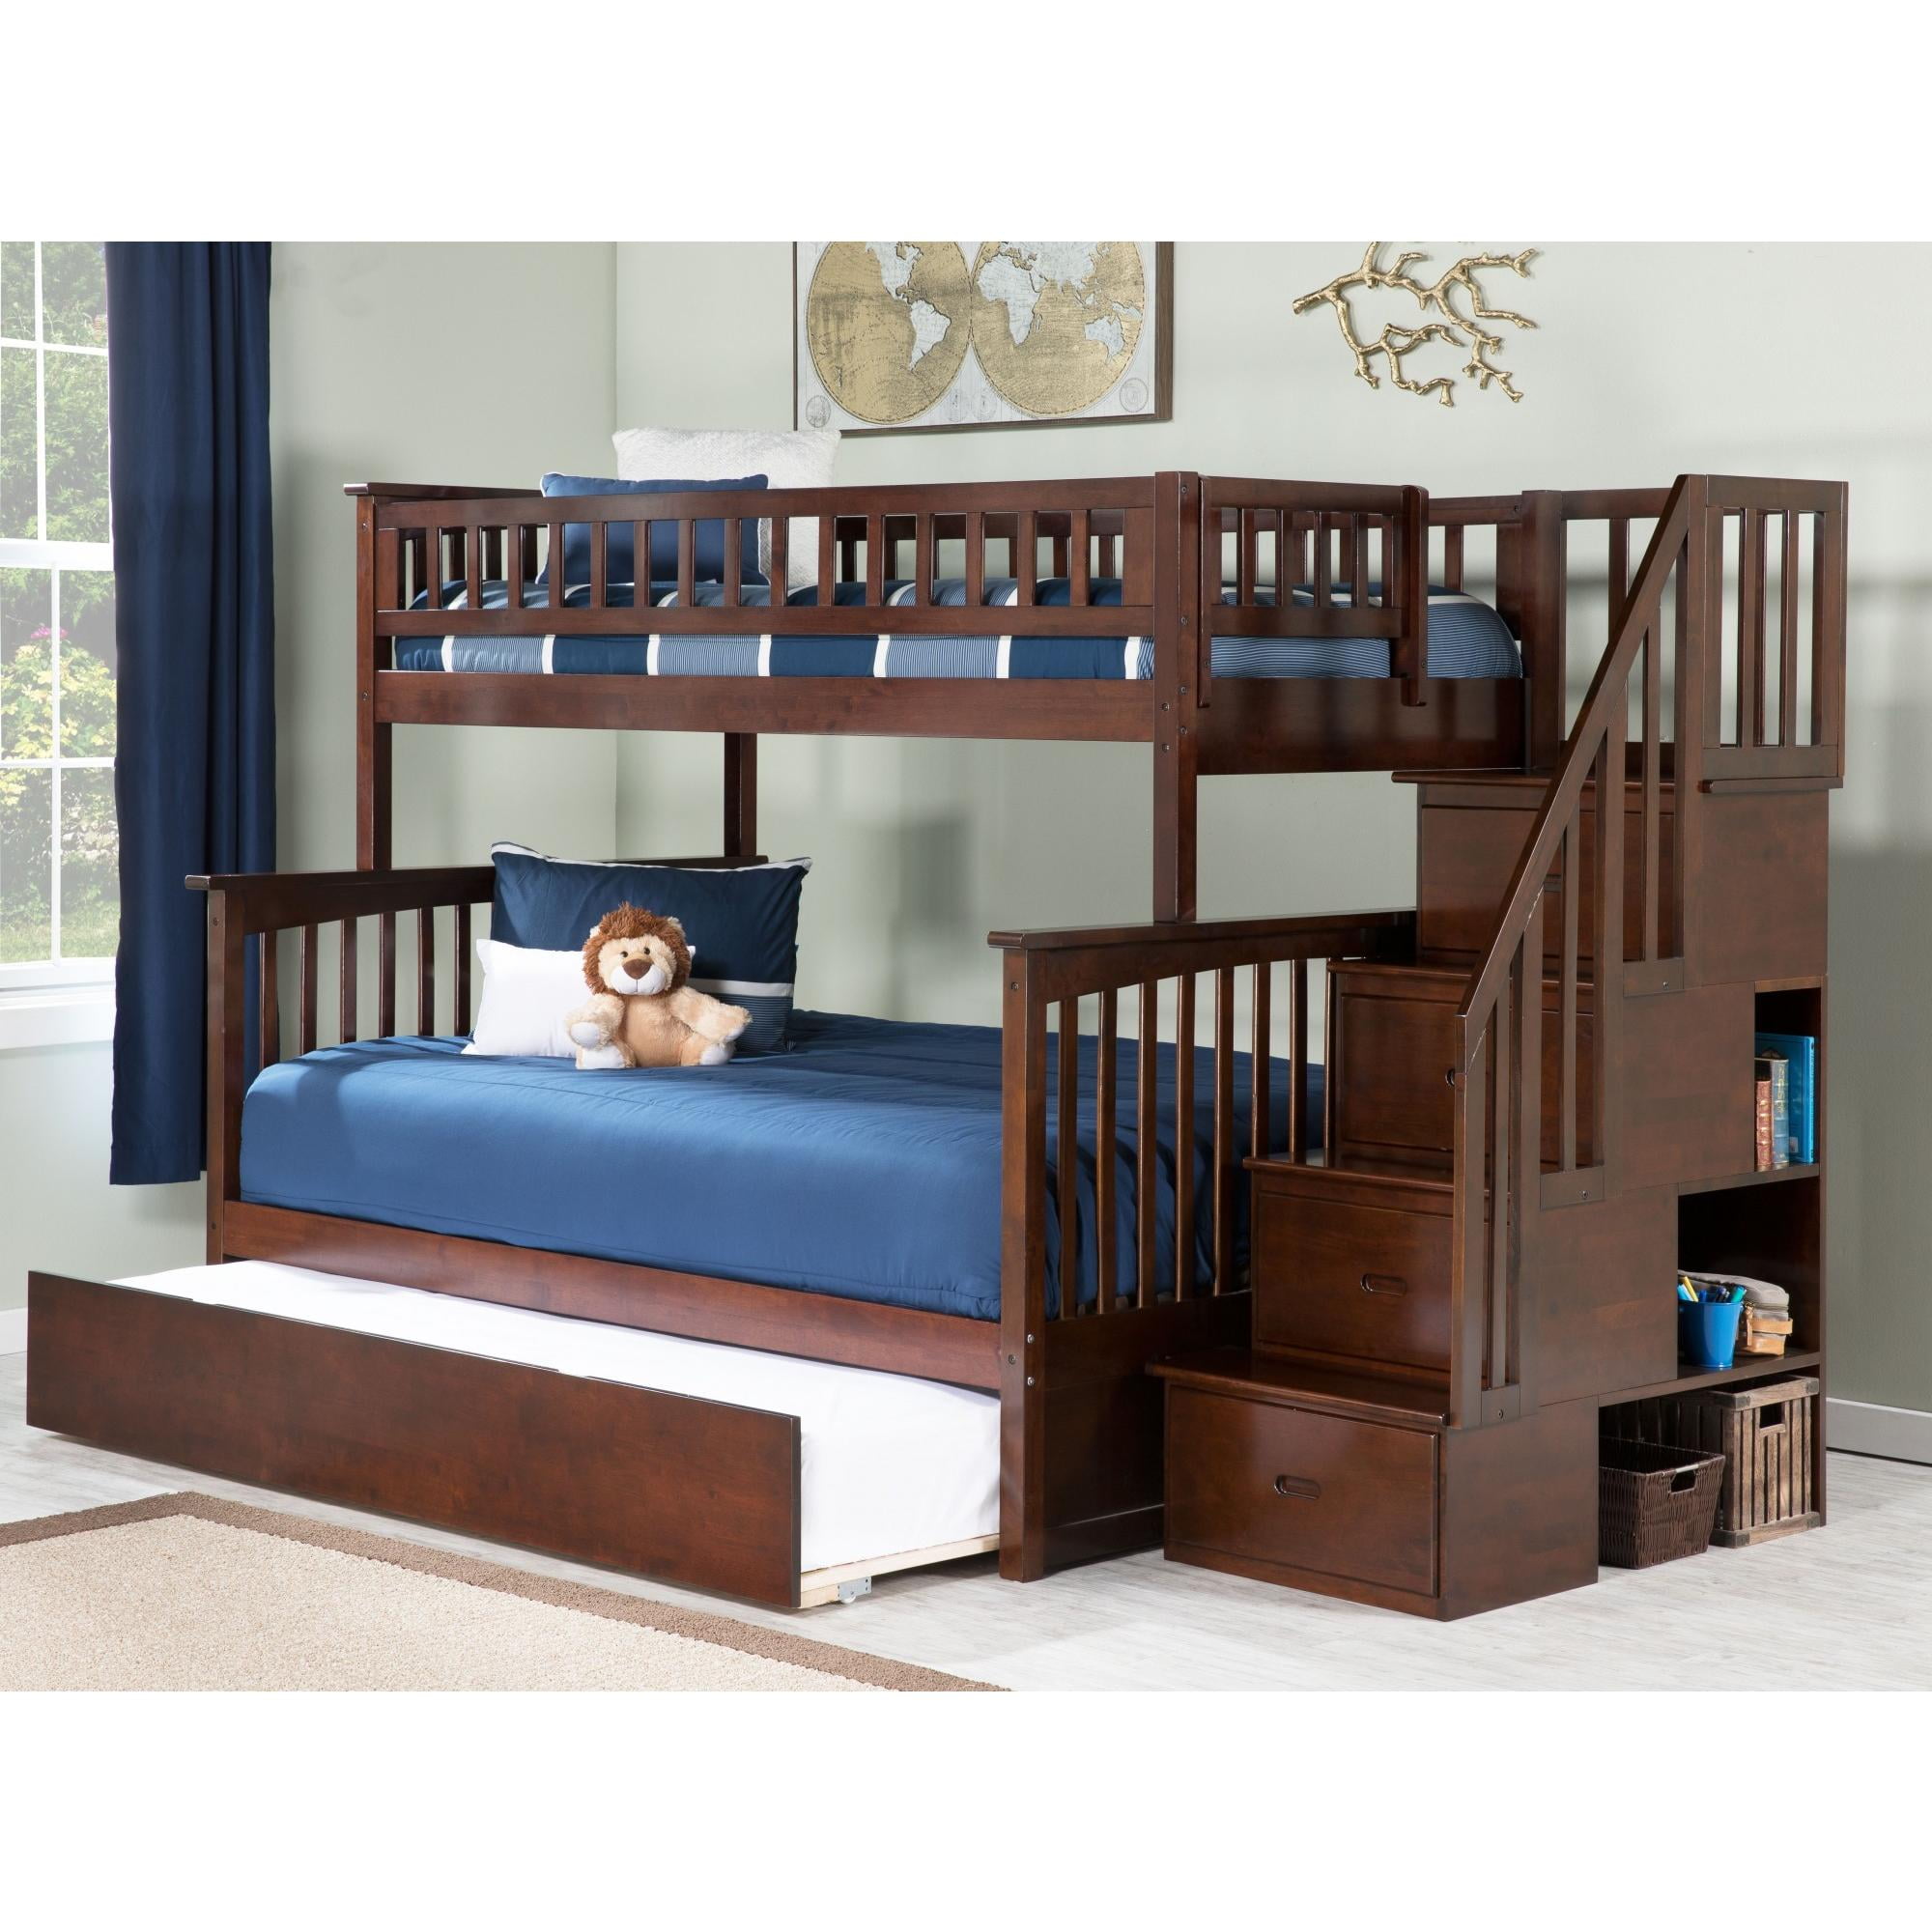 Columbia Staircase Bunk Bed Twin Over, How To Build A Twin Over Full Bunk Bed With Stairs